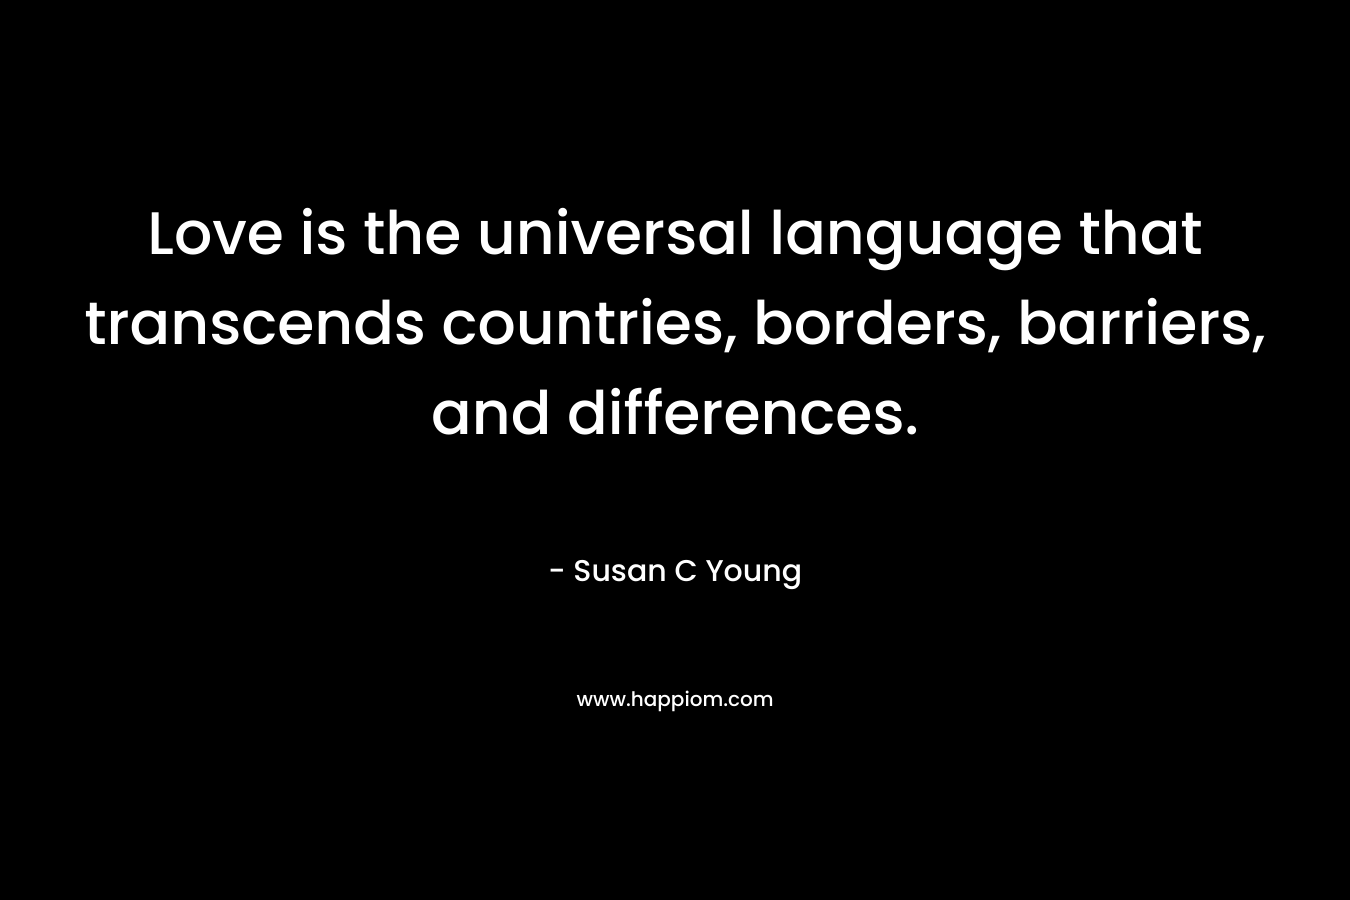 Love is the universal language that transcends countries, borders, barriers, and differences.